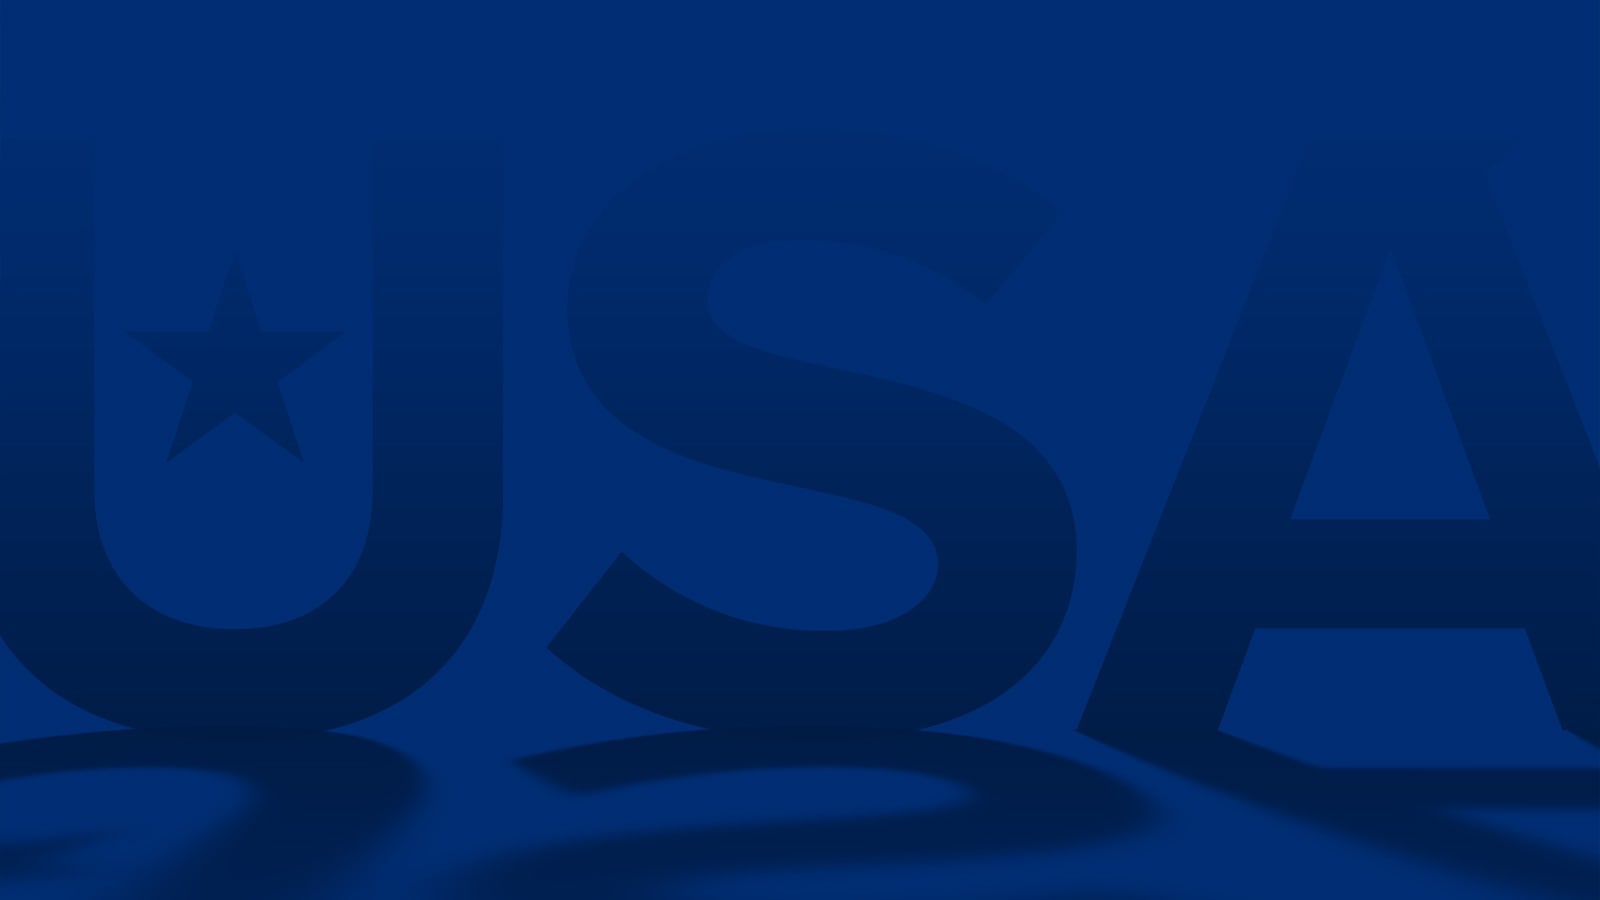 USA Cricket Announces Committee and Officer Appointments